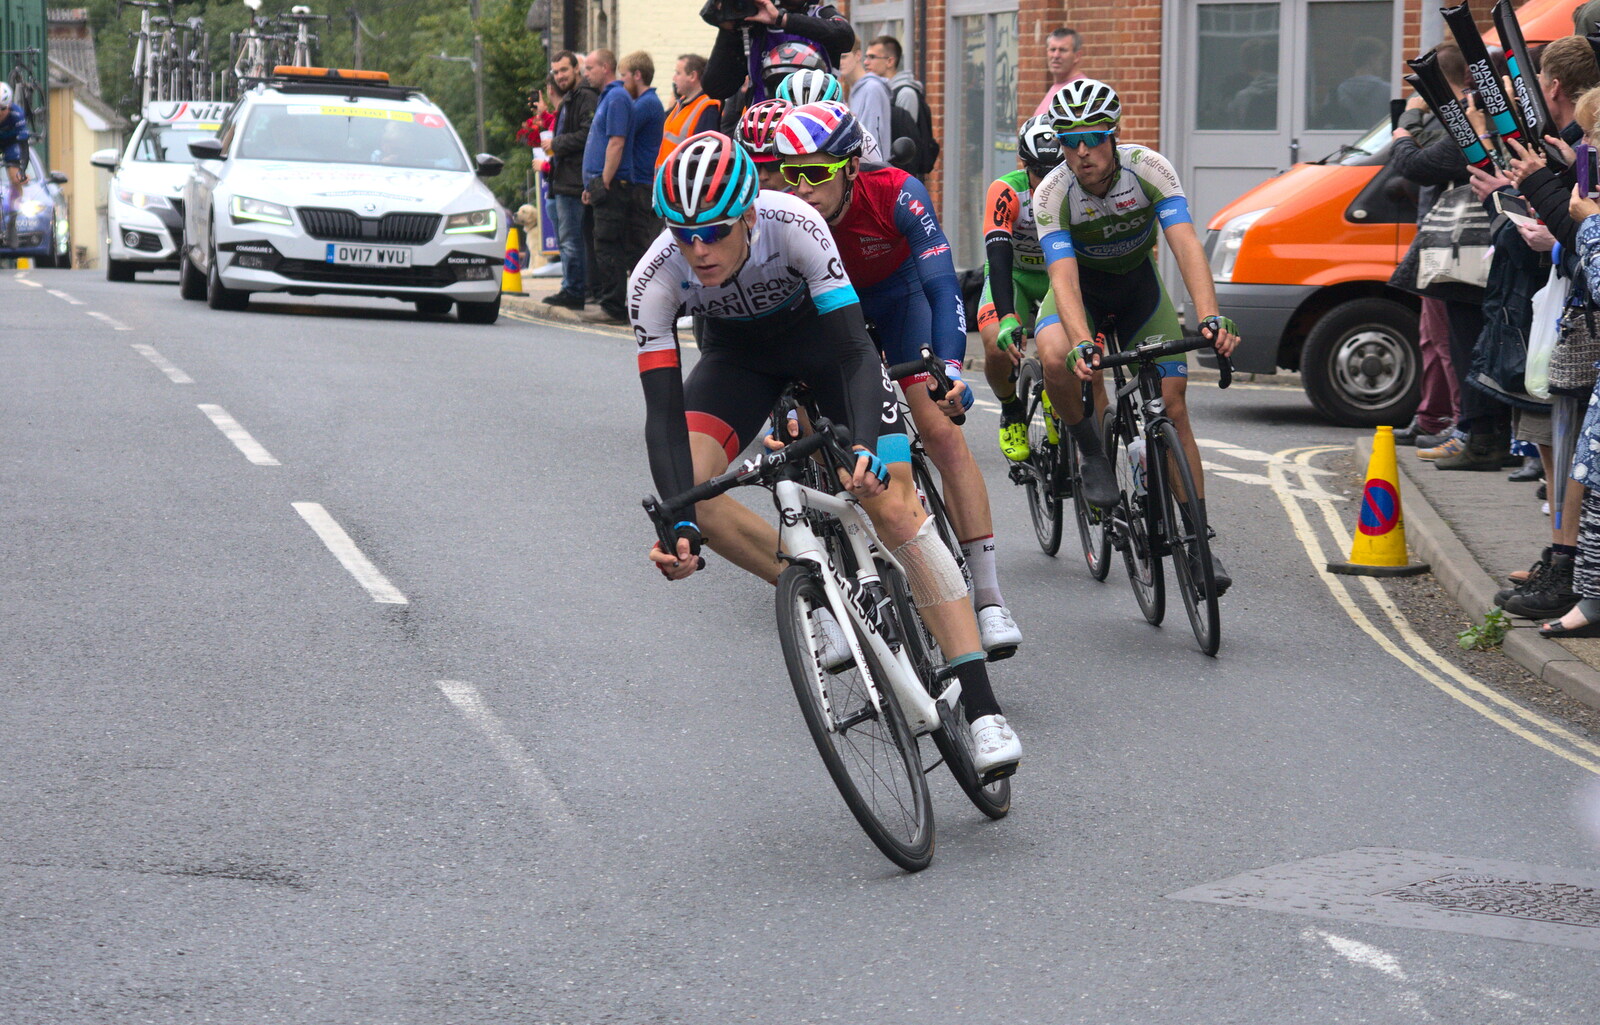 The peloton rounds the corner outside the Bank from The Tour of Britain Does Eye, Suffolk - 8th September 2017